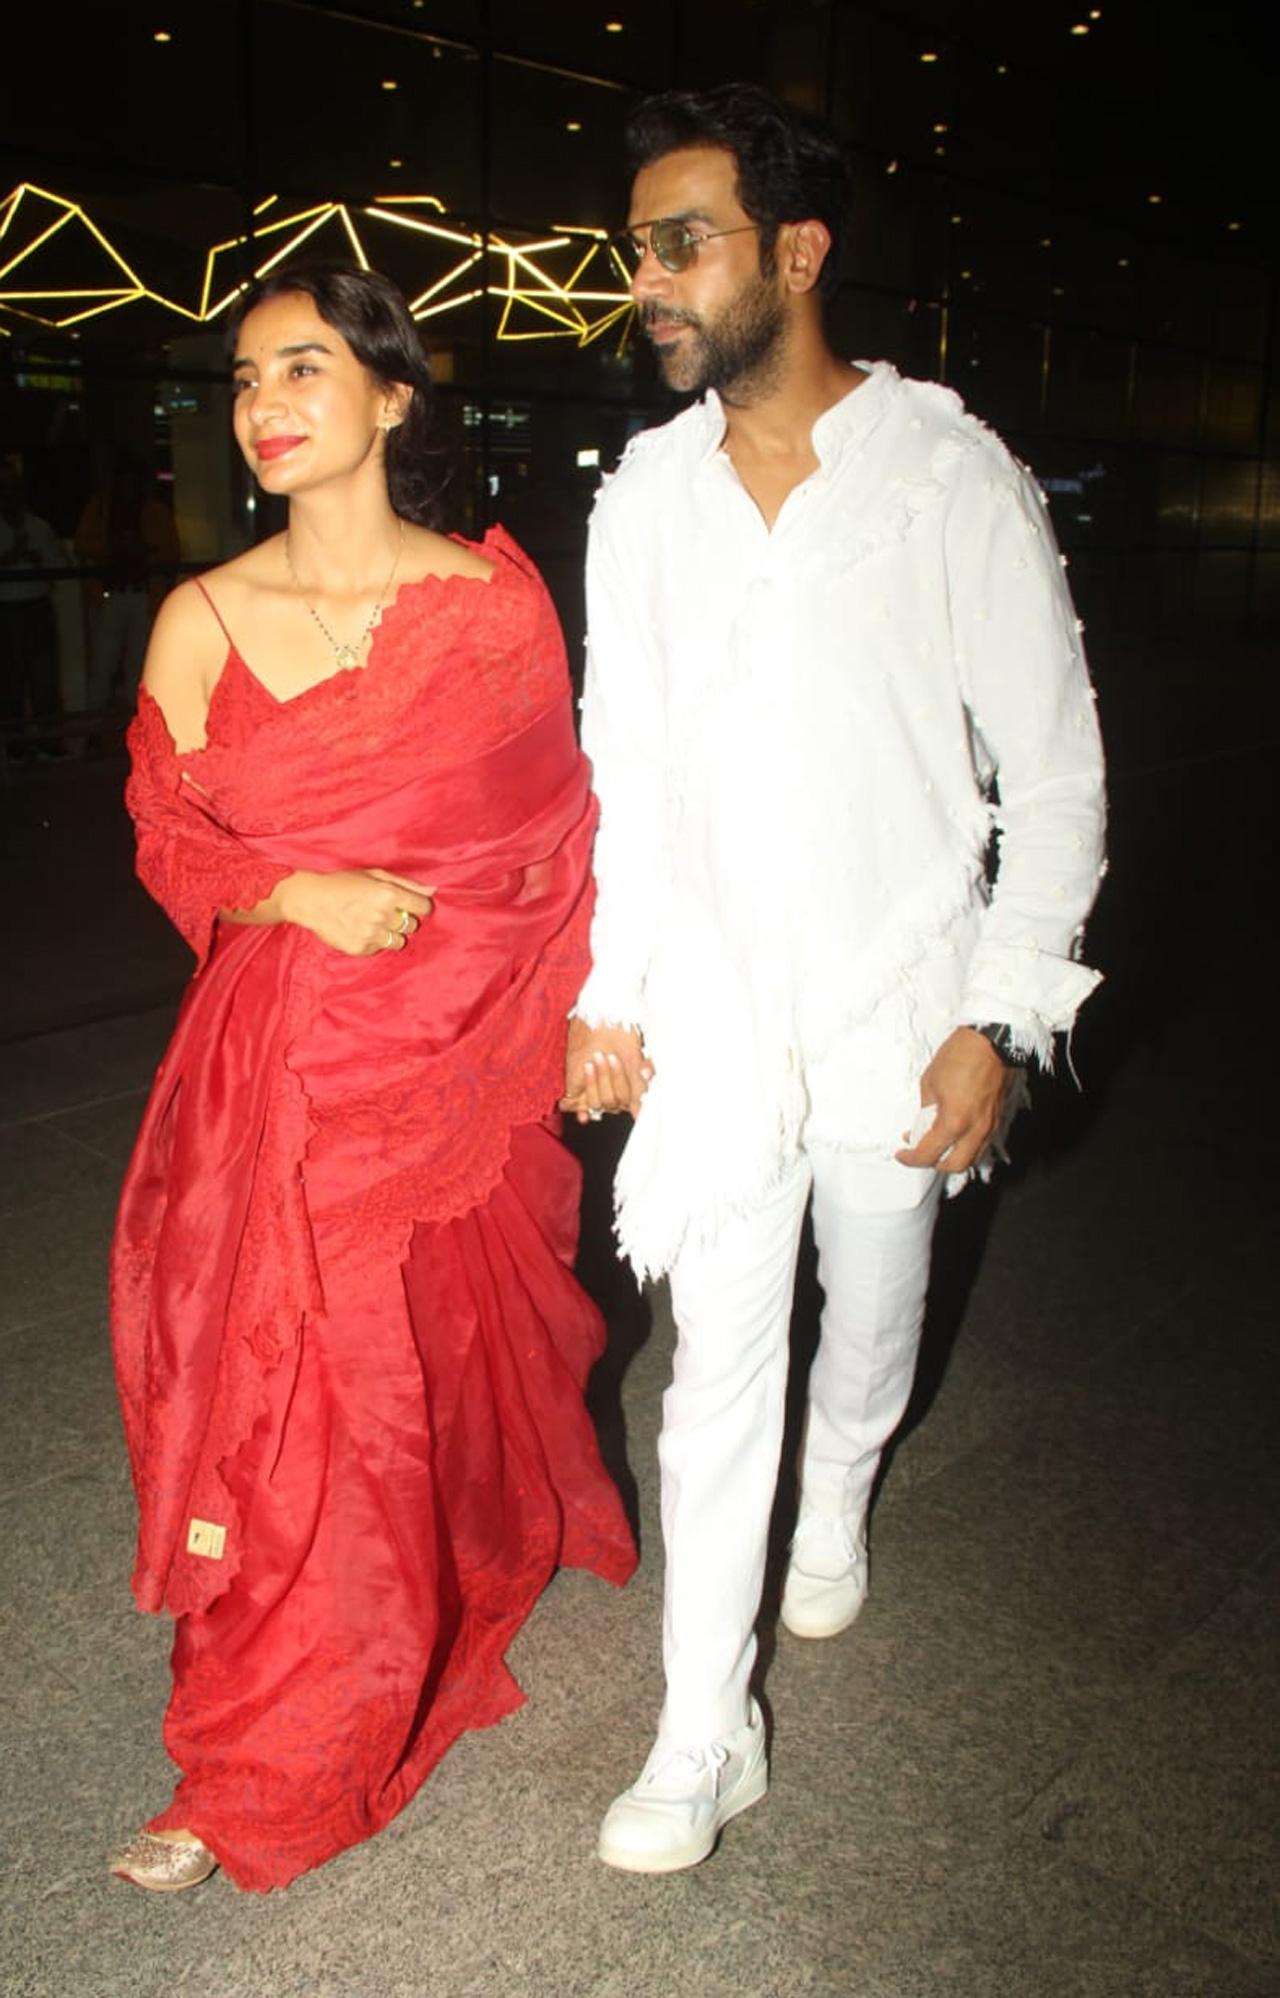 Several other celebrities including Bhumi Pednekar, Malaika Arora, Ayushmann Khurrana and more had taken to their respective social media handles to share congratulatory messages. The couple, who had been dating each other for a long time, reportedly tied the knot in Chandigarh. They have shared screen space in Patralekhaa's Bollywood debut film 'Citylights'.